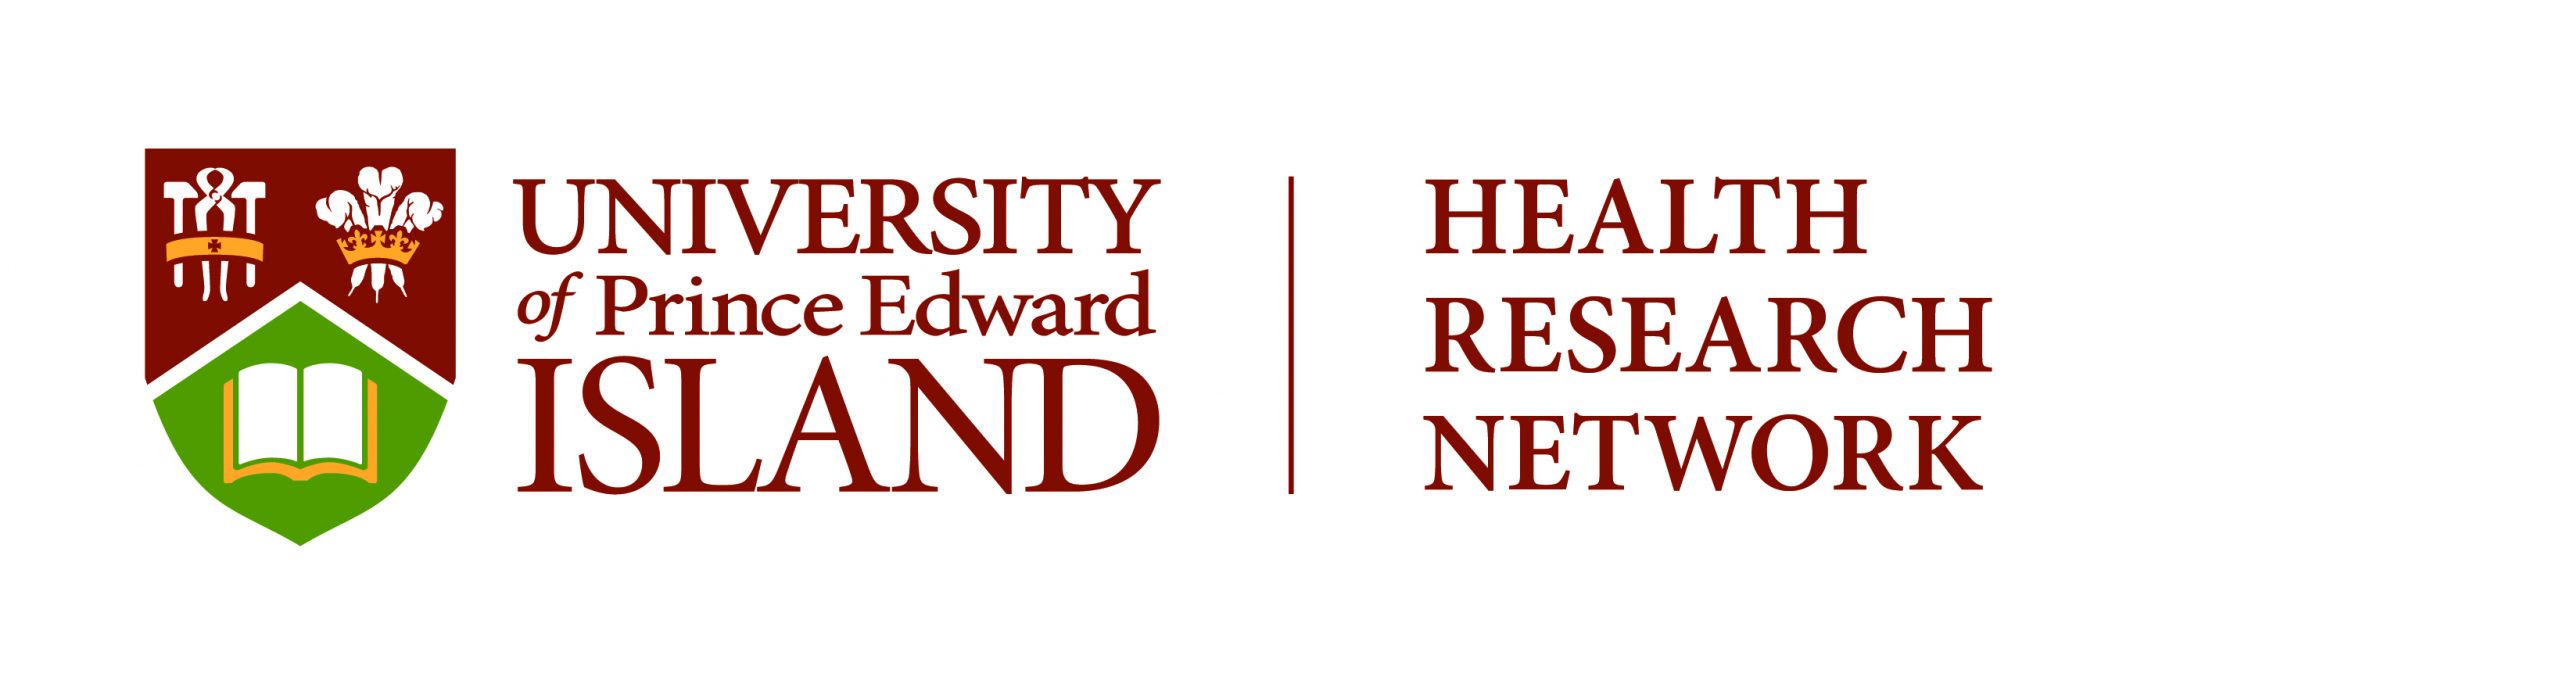 UPEI Health Research Network